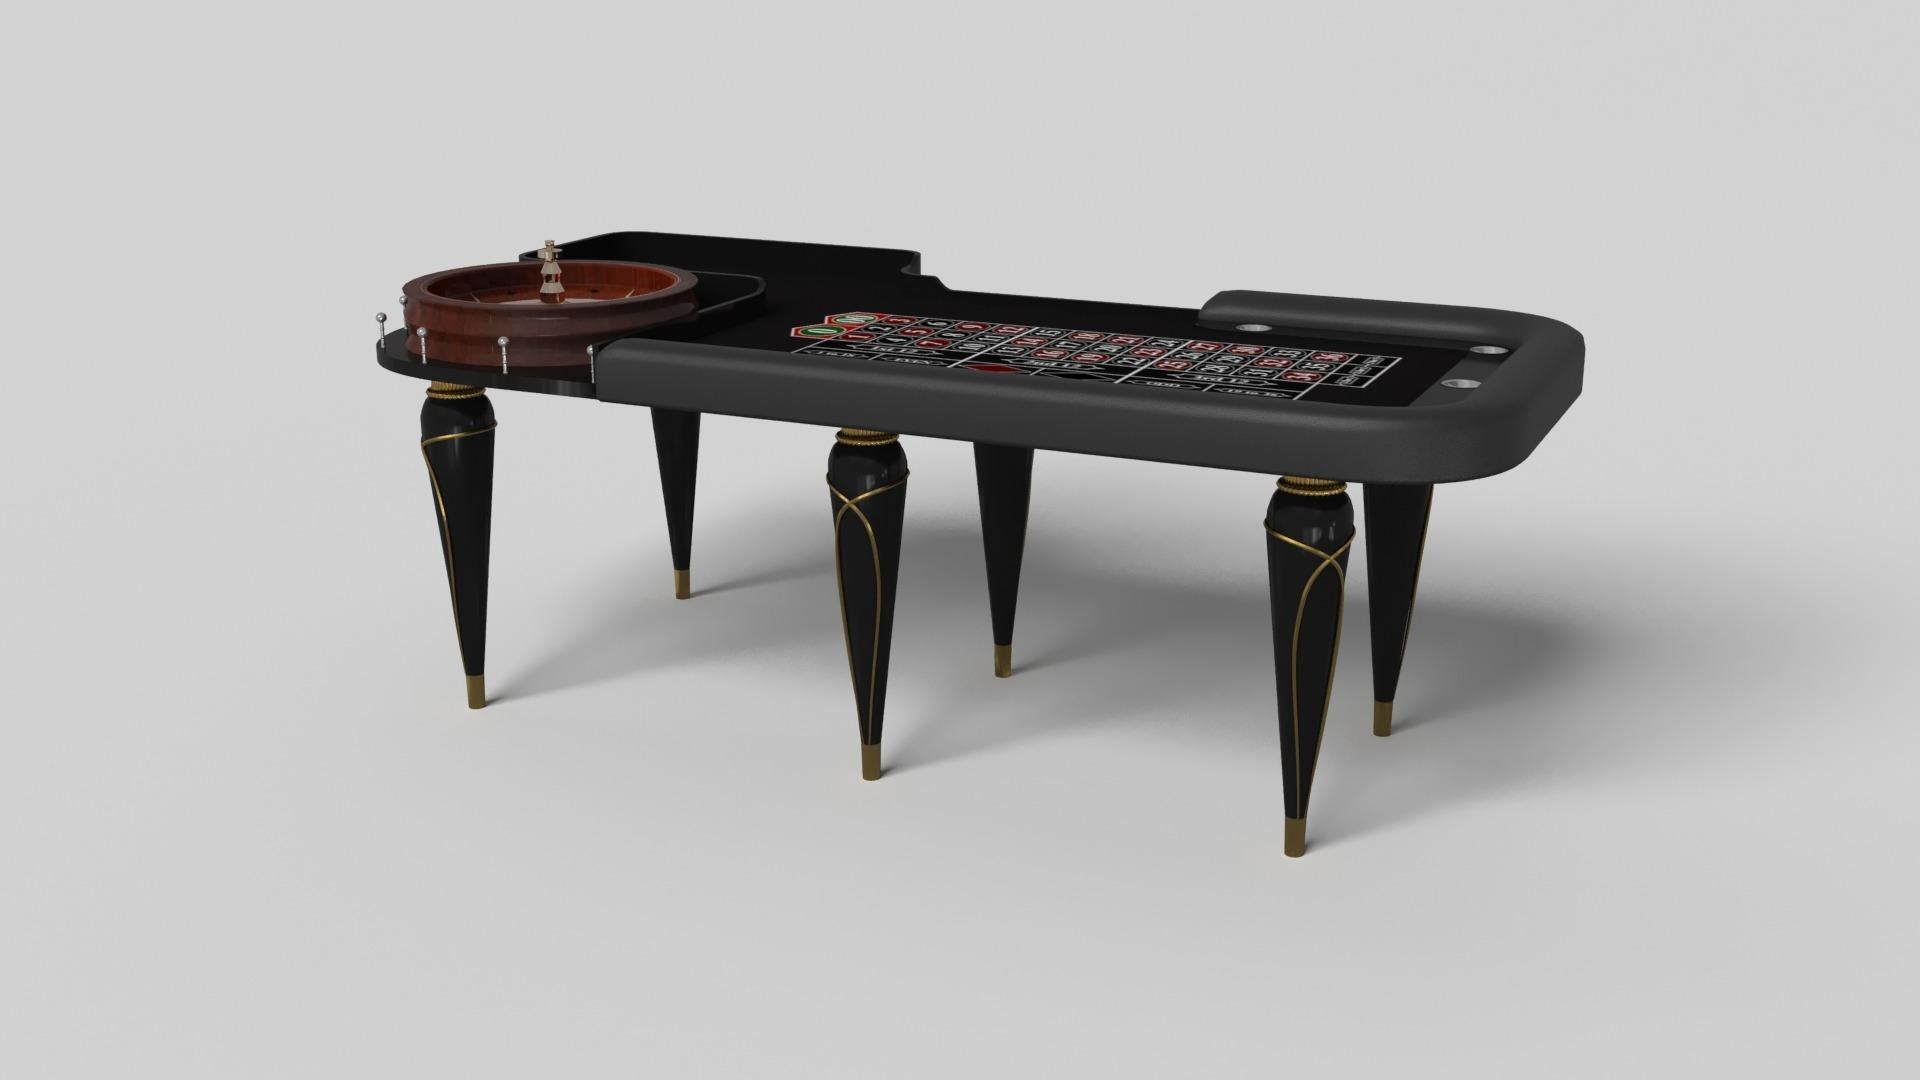 Champagne gold accents add undeniable elegance to this luxury roulette table. Offering superior playability and uncompromised style, this design features hand carved details, decorative metal elements, and metal sabots at the bottom of each leg. The